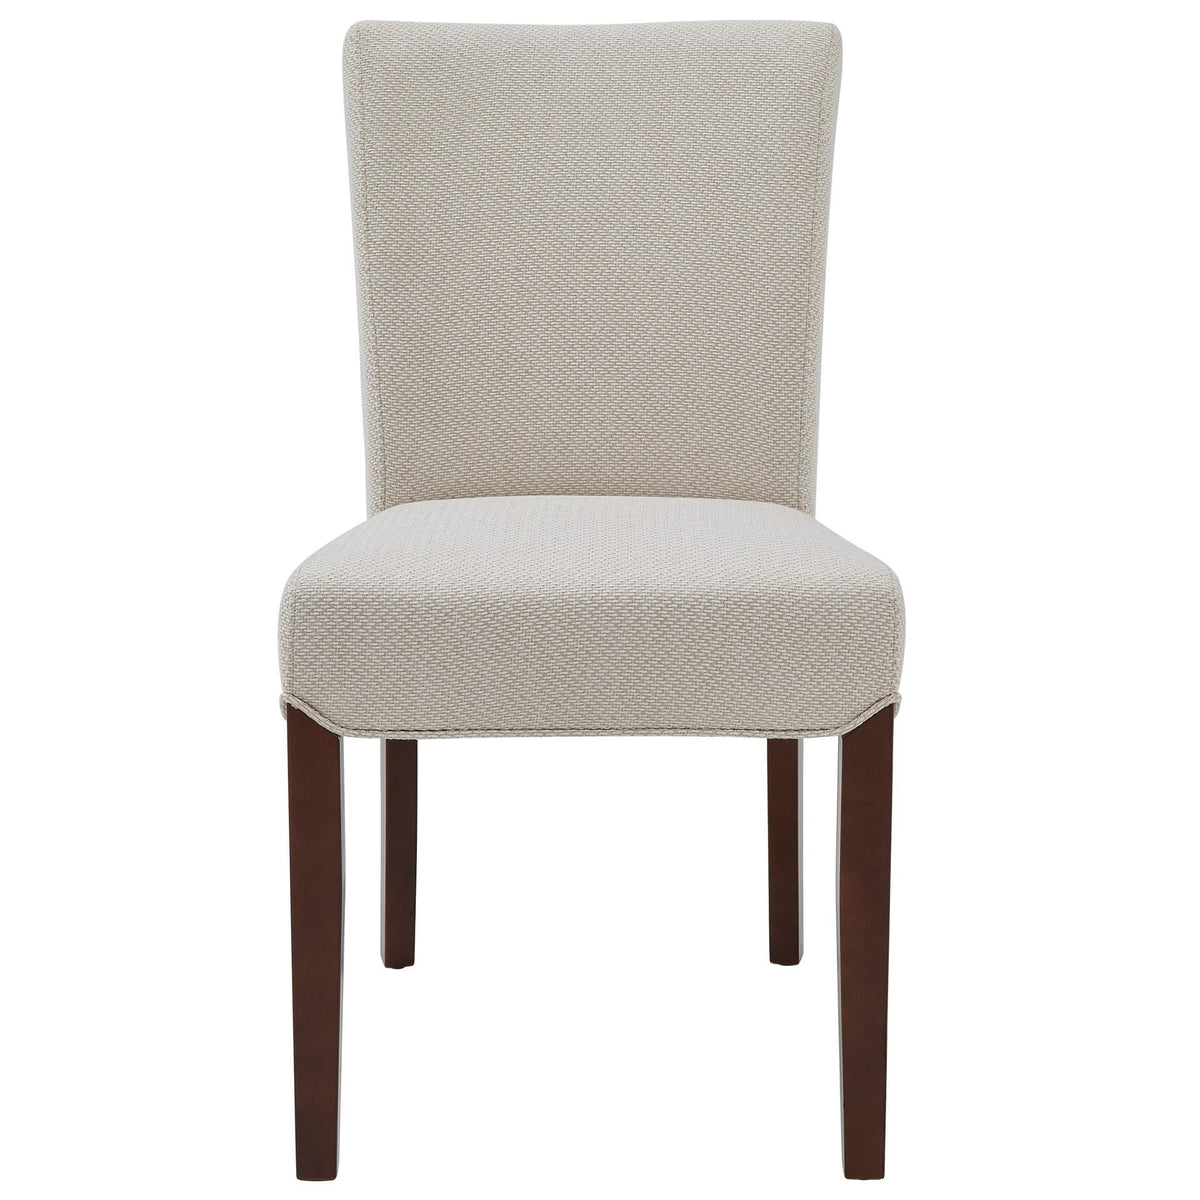 Beverly Hills Fabric Chair (Set of 2) by New Pacific Direct - 1900167